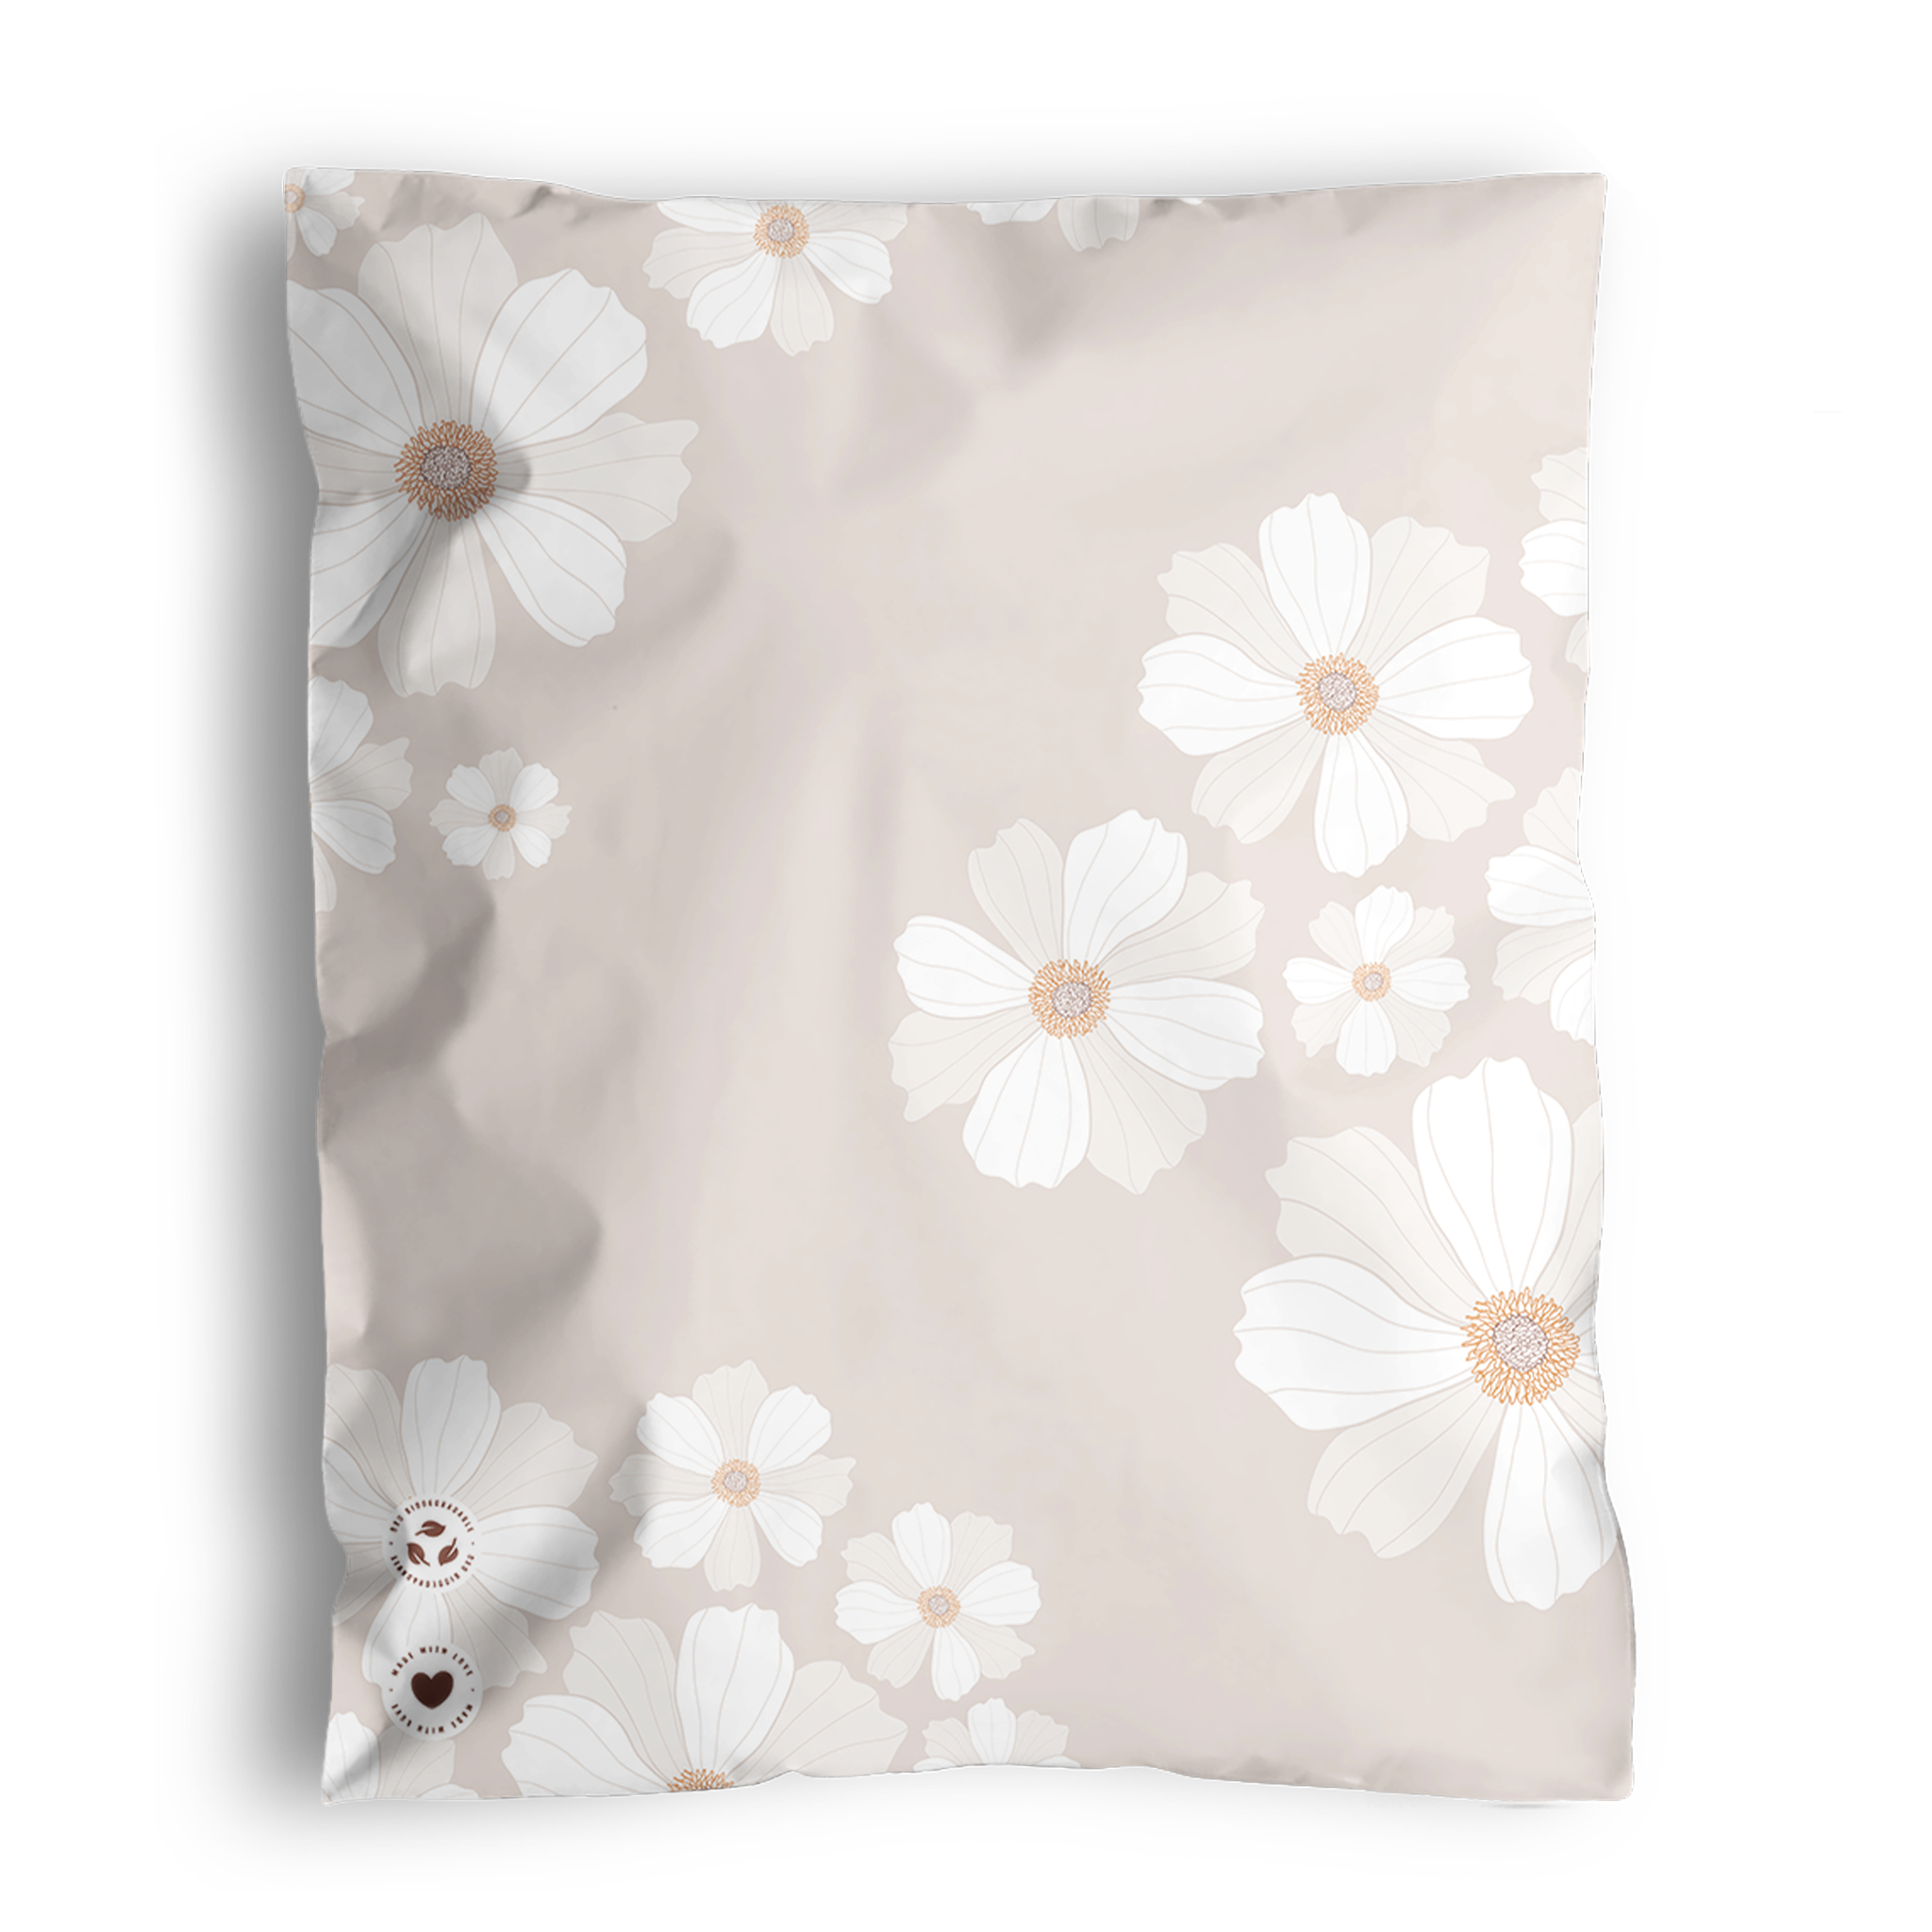 A square pillow with a floral pattern featuring white daisies on a light beige, recyclable background made by impack.co showcasing the Cosmos Biodegradable Mailers 10" x 13".